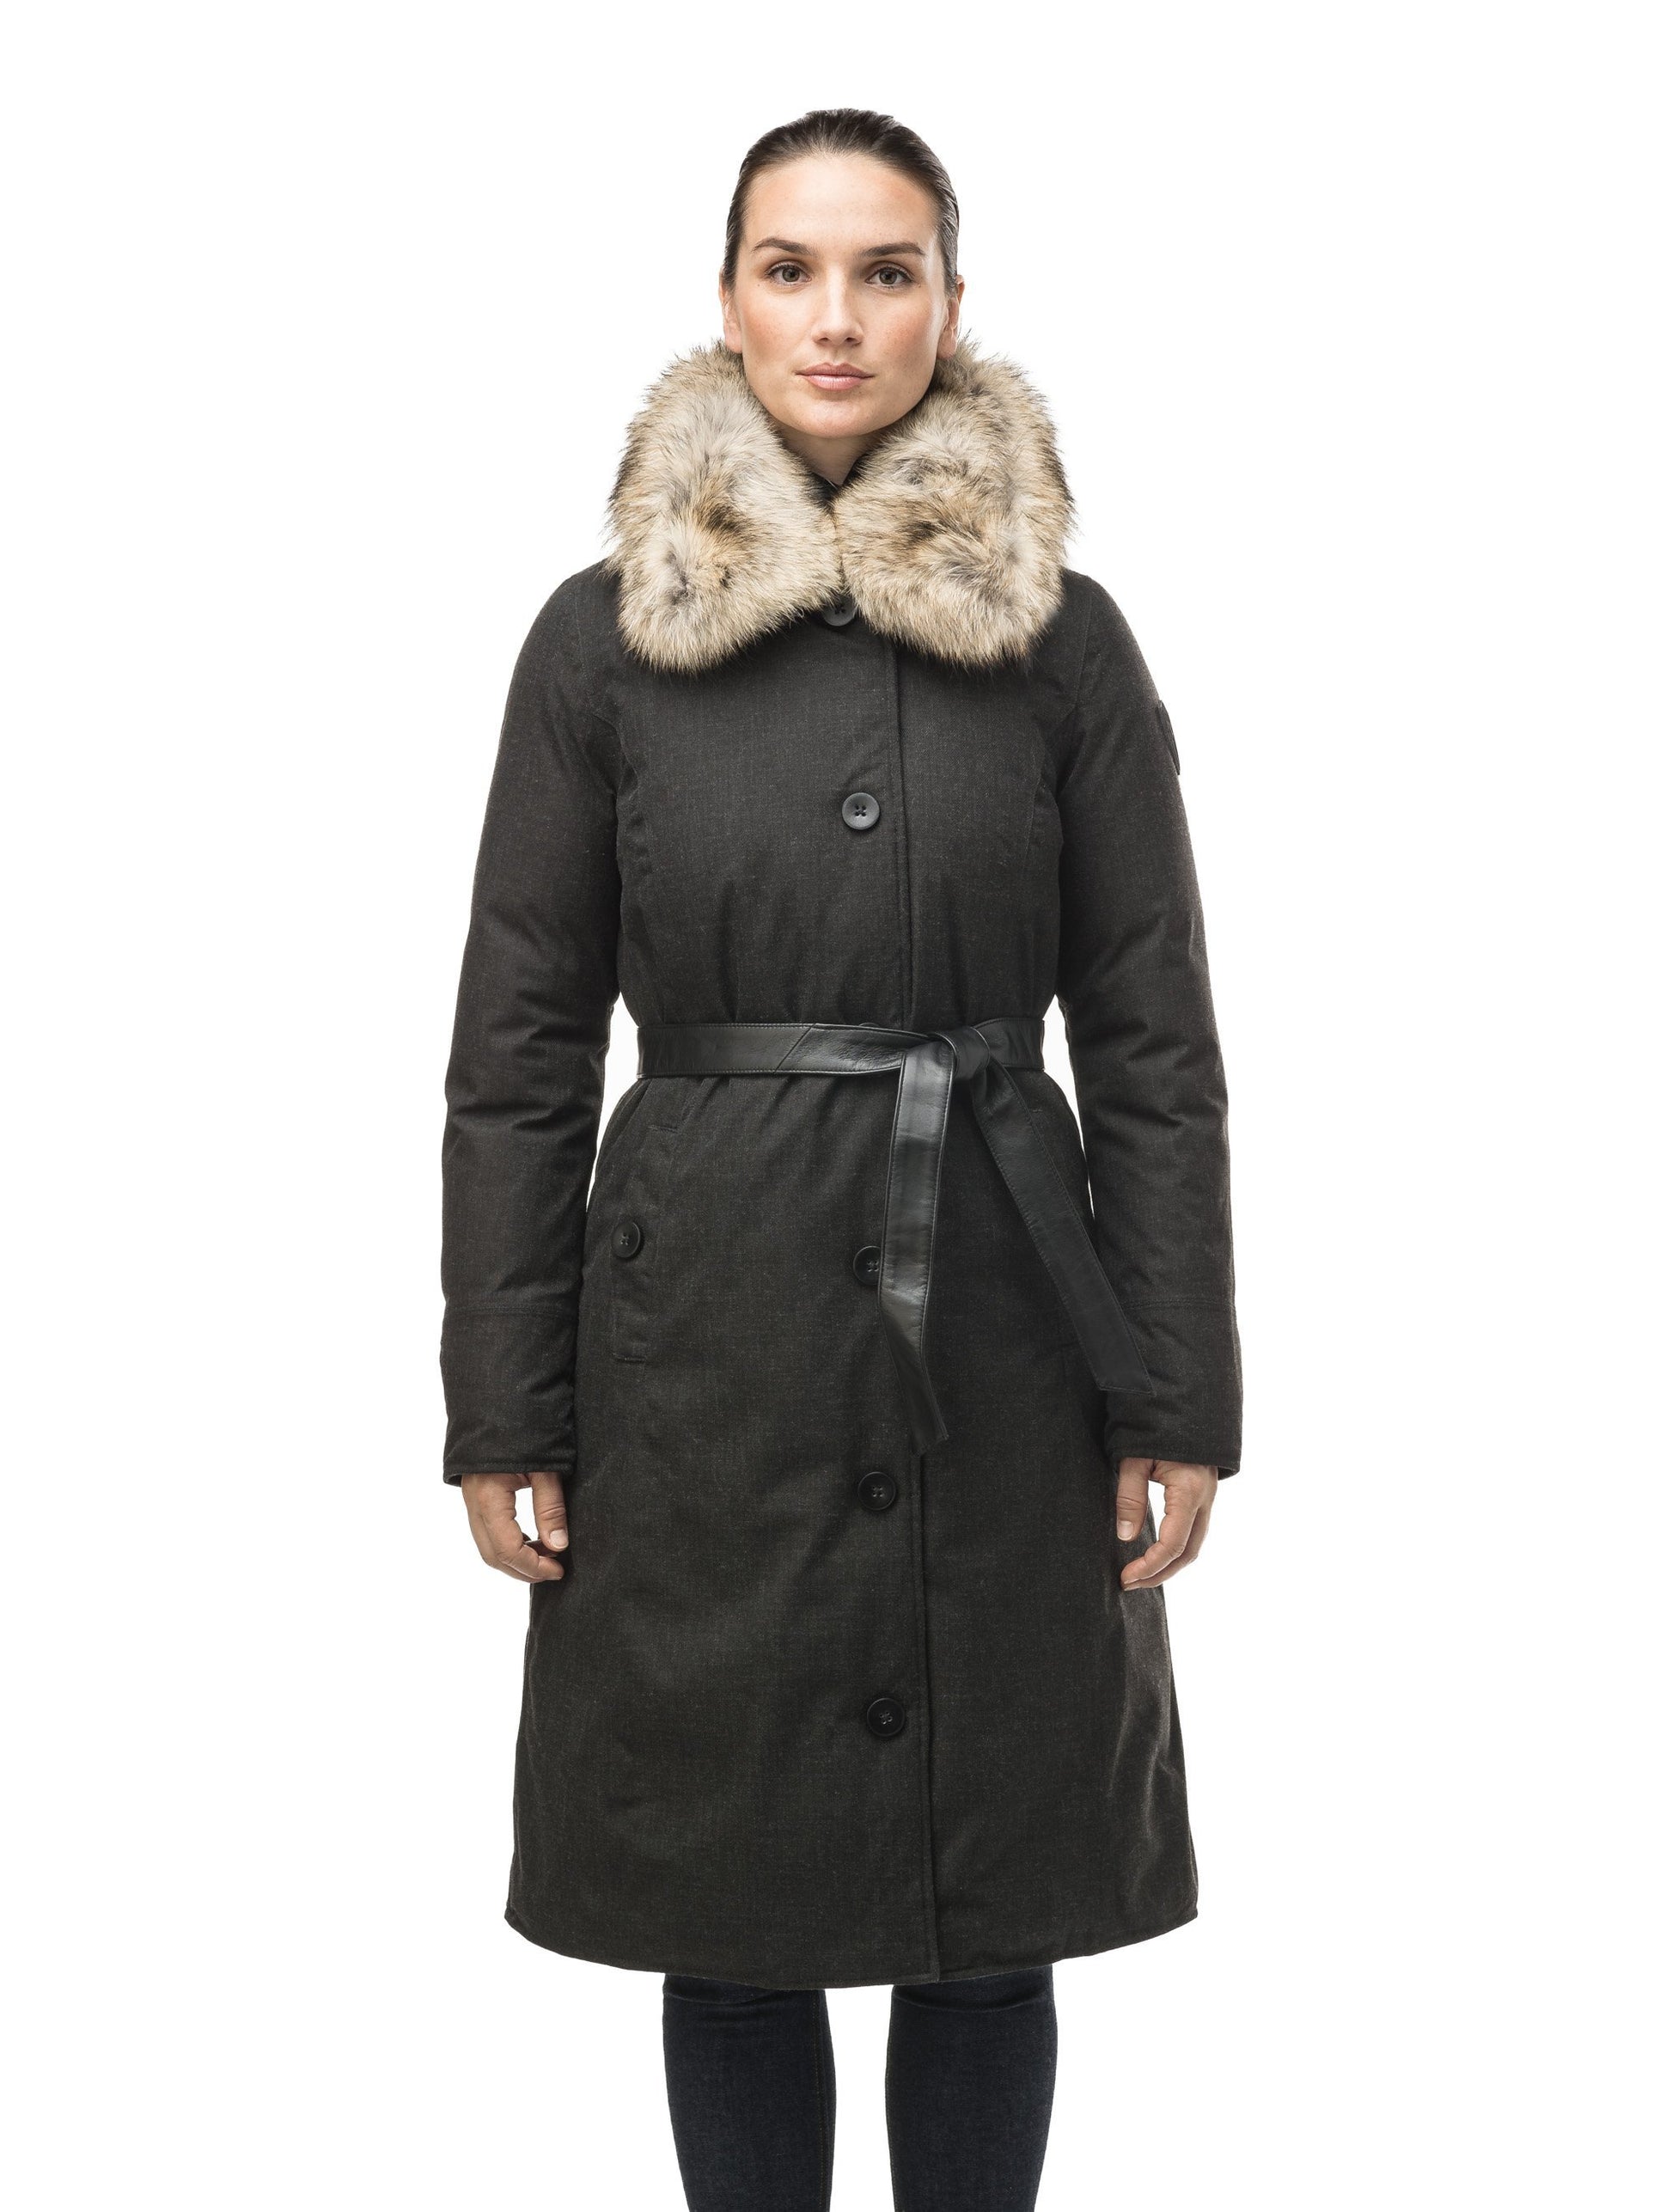 Women's lightweight down filled parka with a removable fur collar and a washable, Japanese DWR Leather belt in H. Black